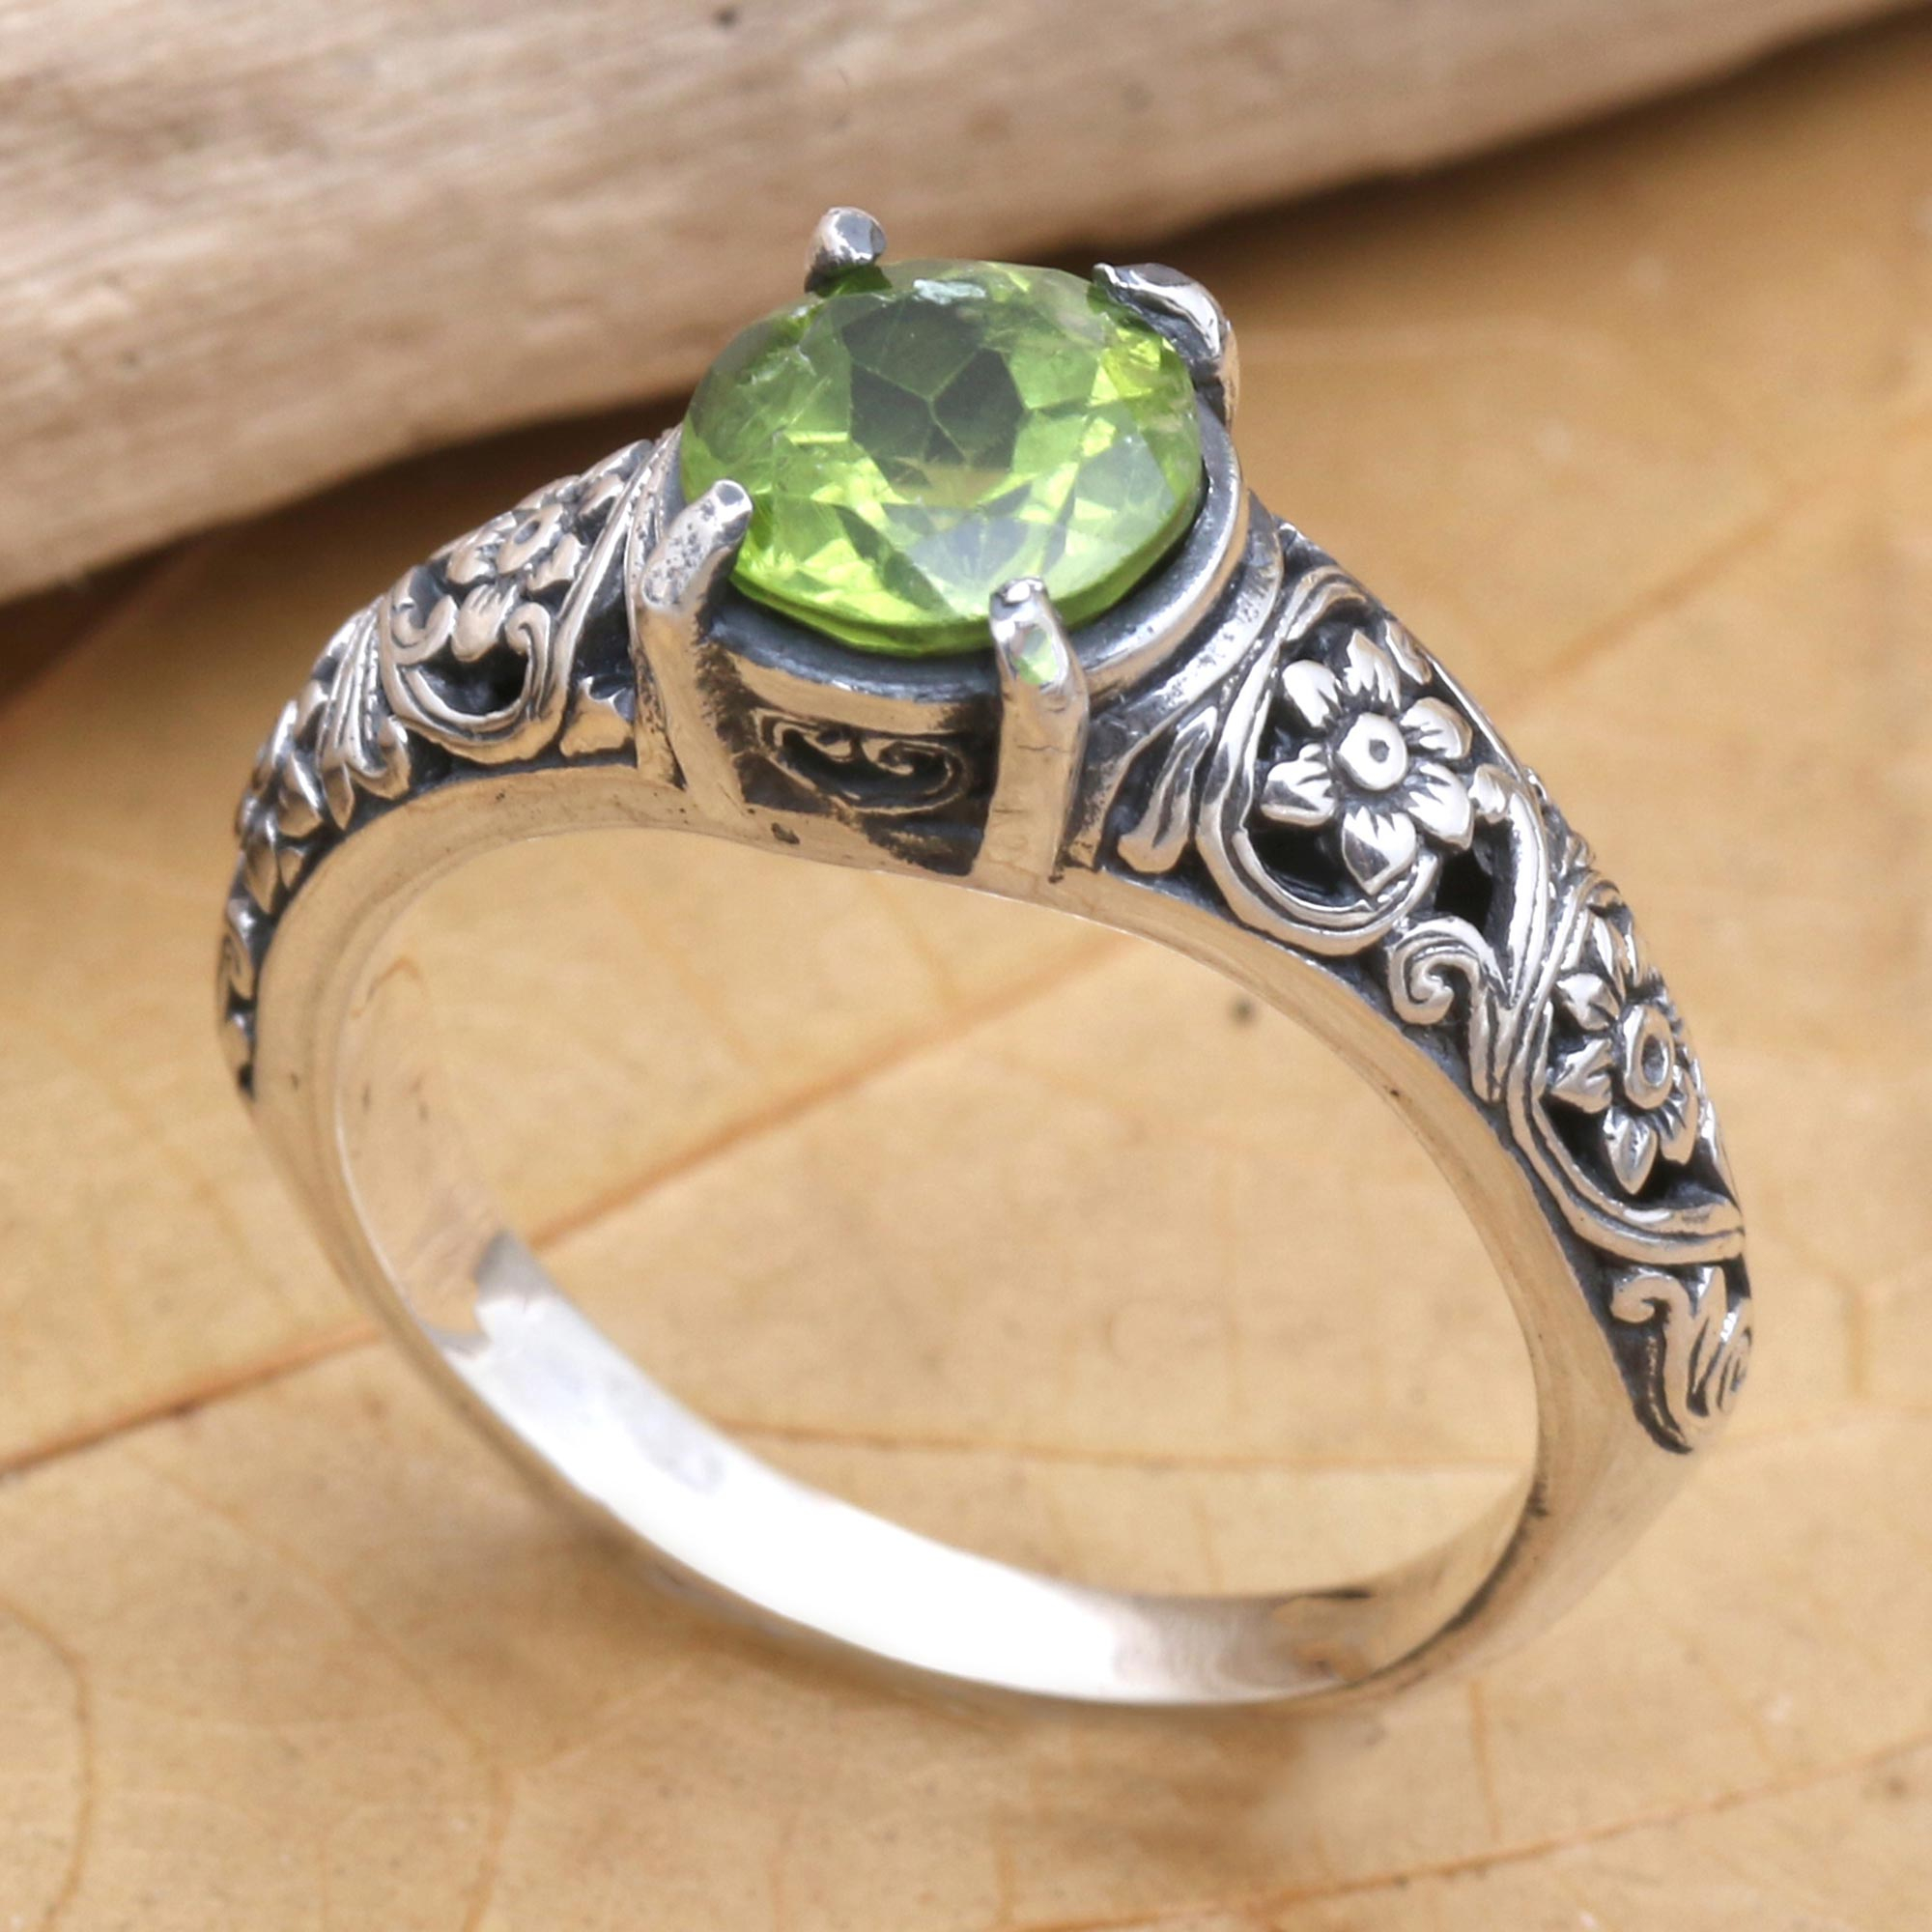 Peridot and Sterling Silver Solitaire Ring - Balinese Beach in